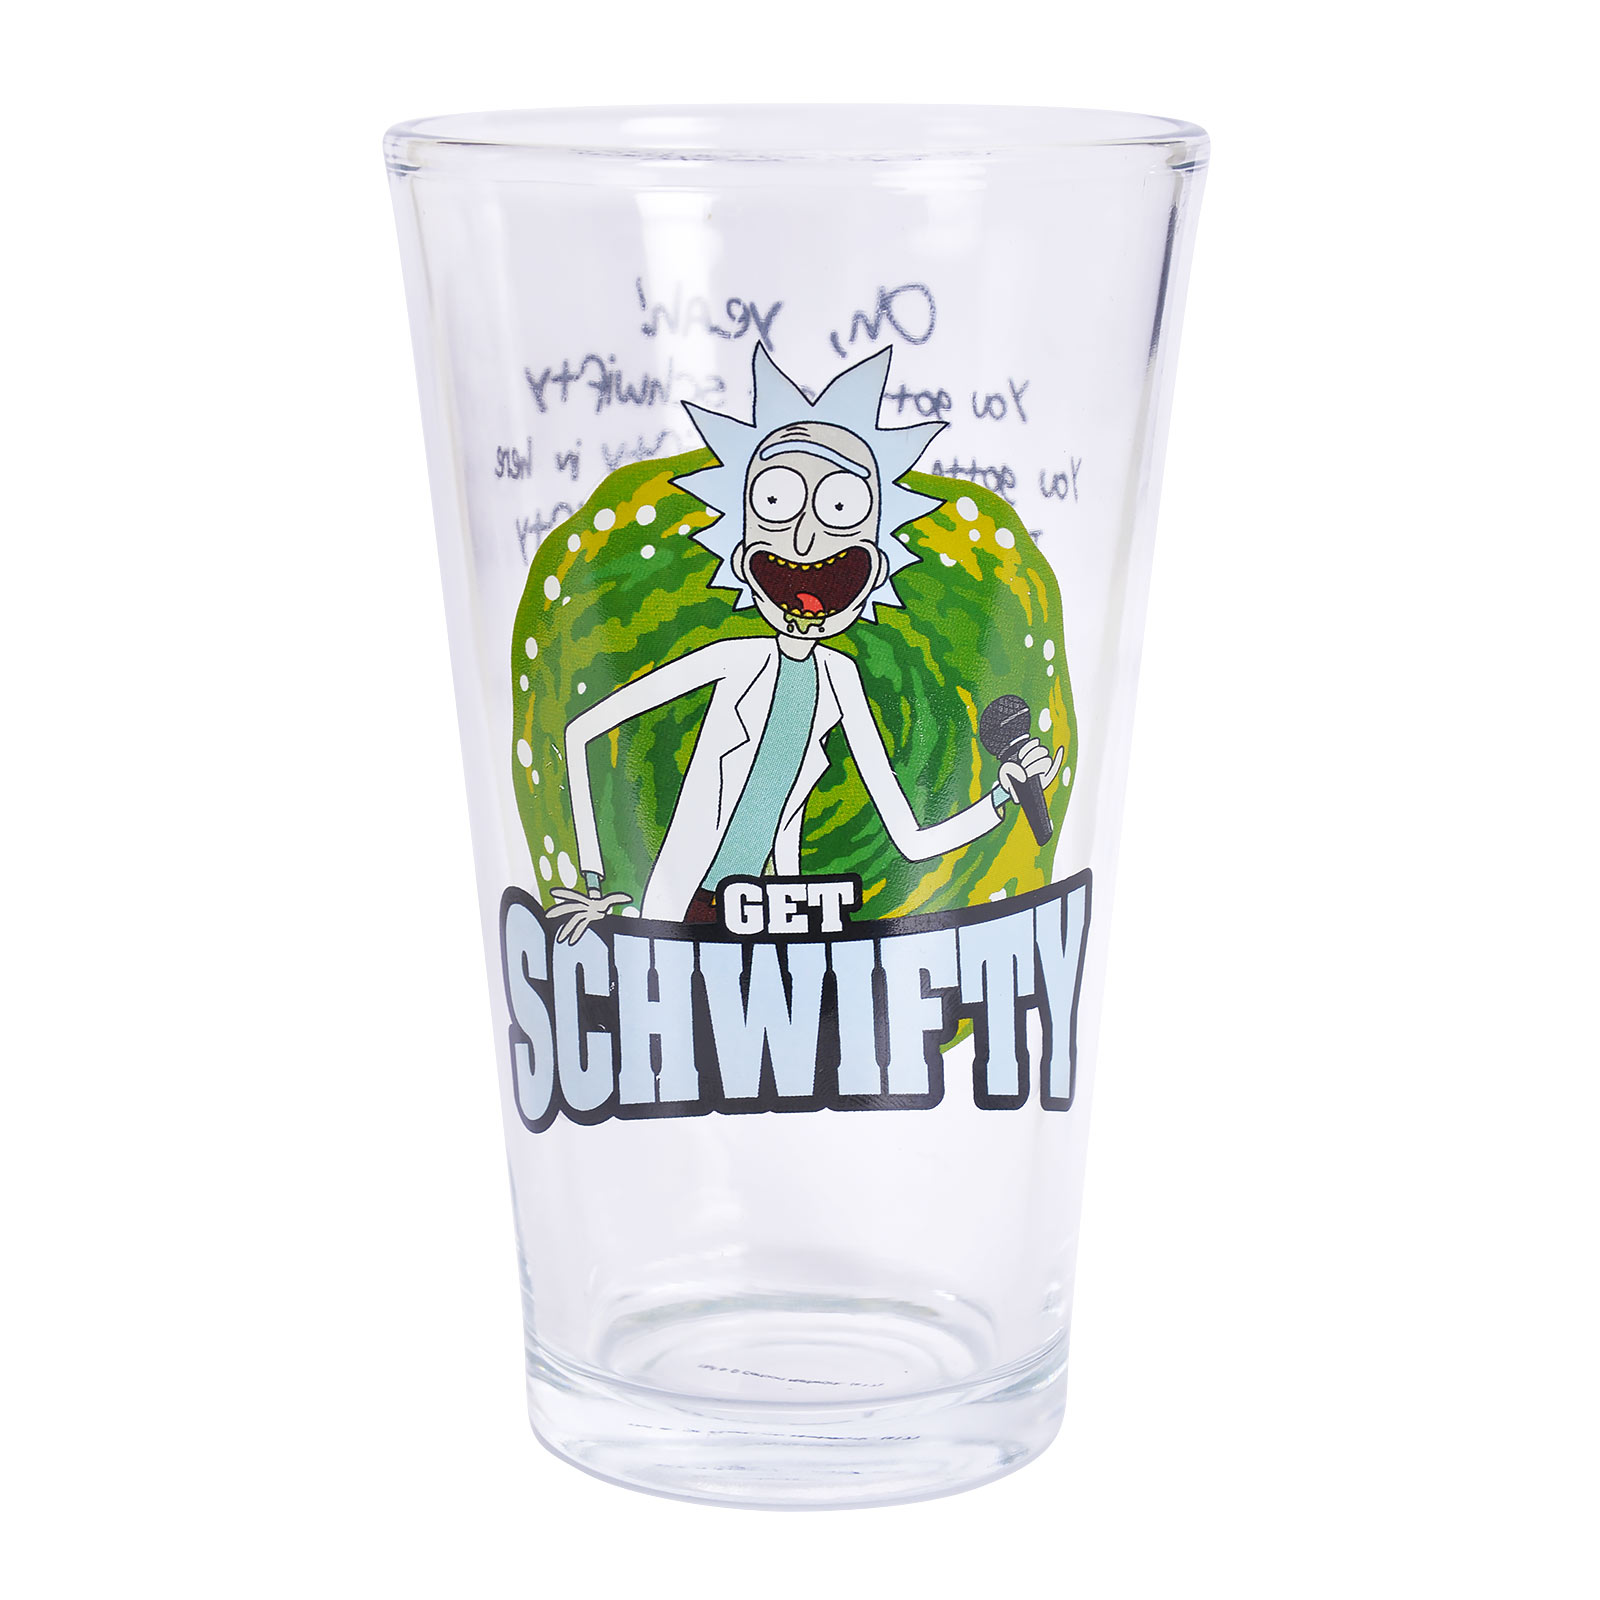 Rick and Morty - Get Schwifty Glas